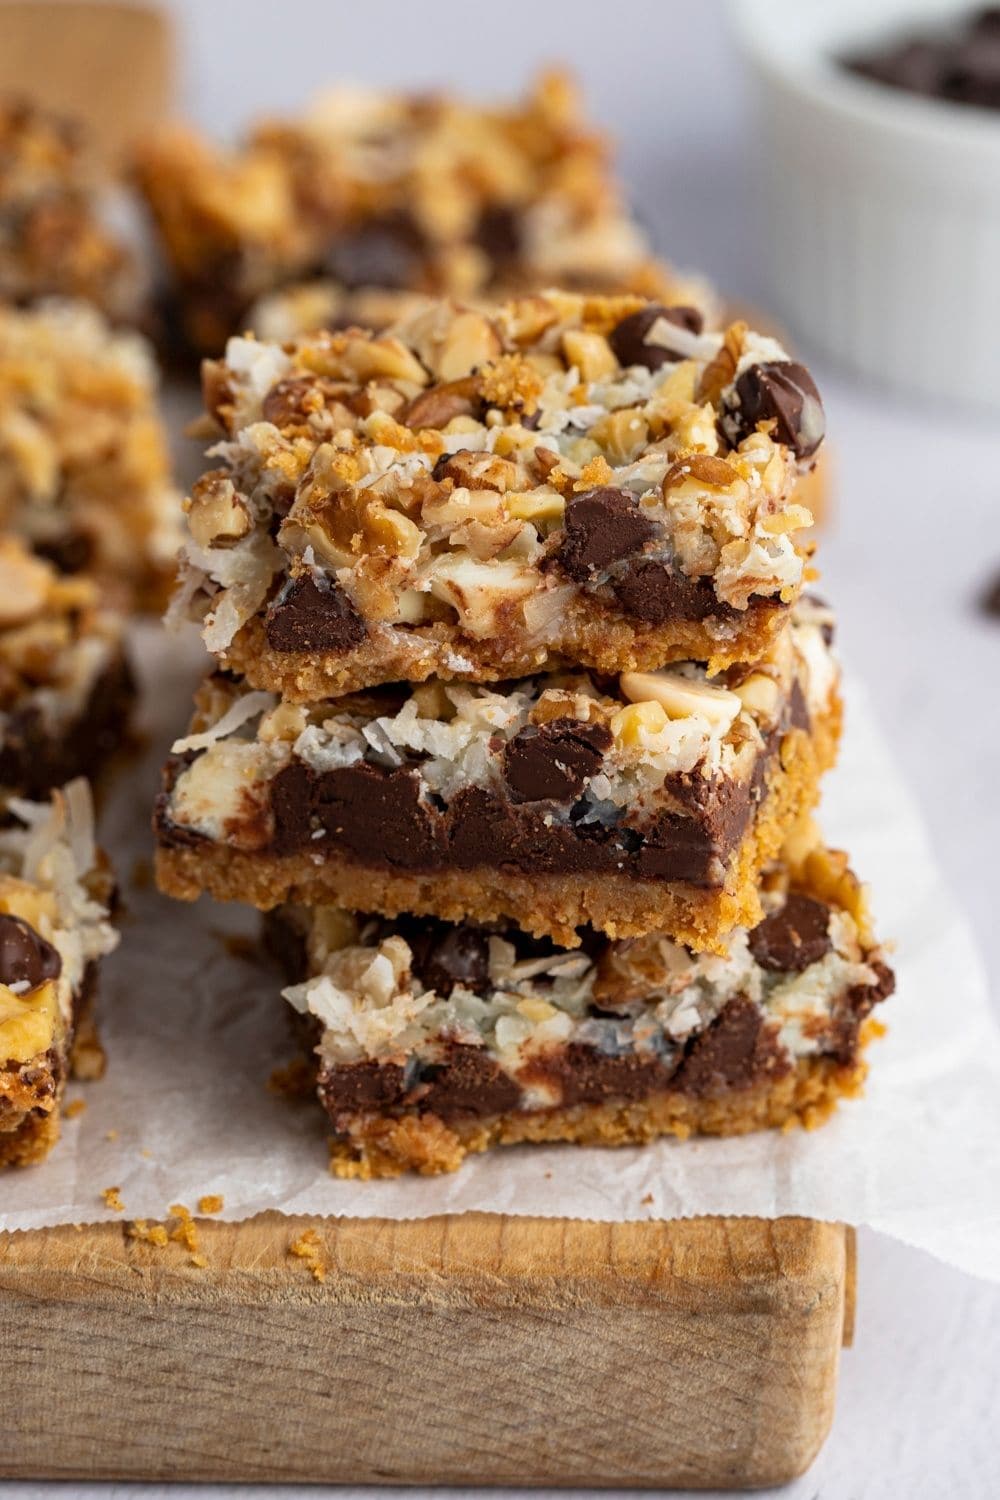 Homemade Hello Dolly Bars with Nuts and Chocolate Chips